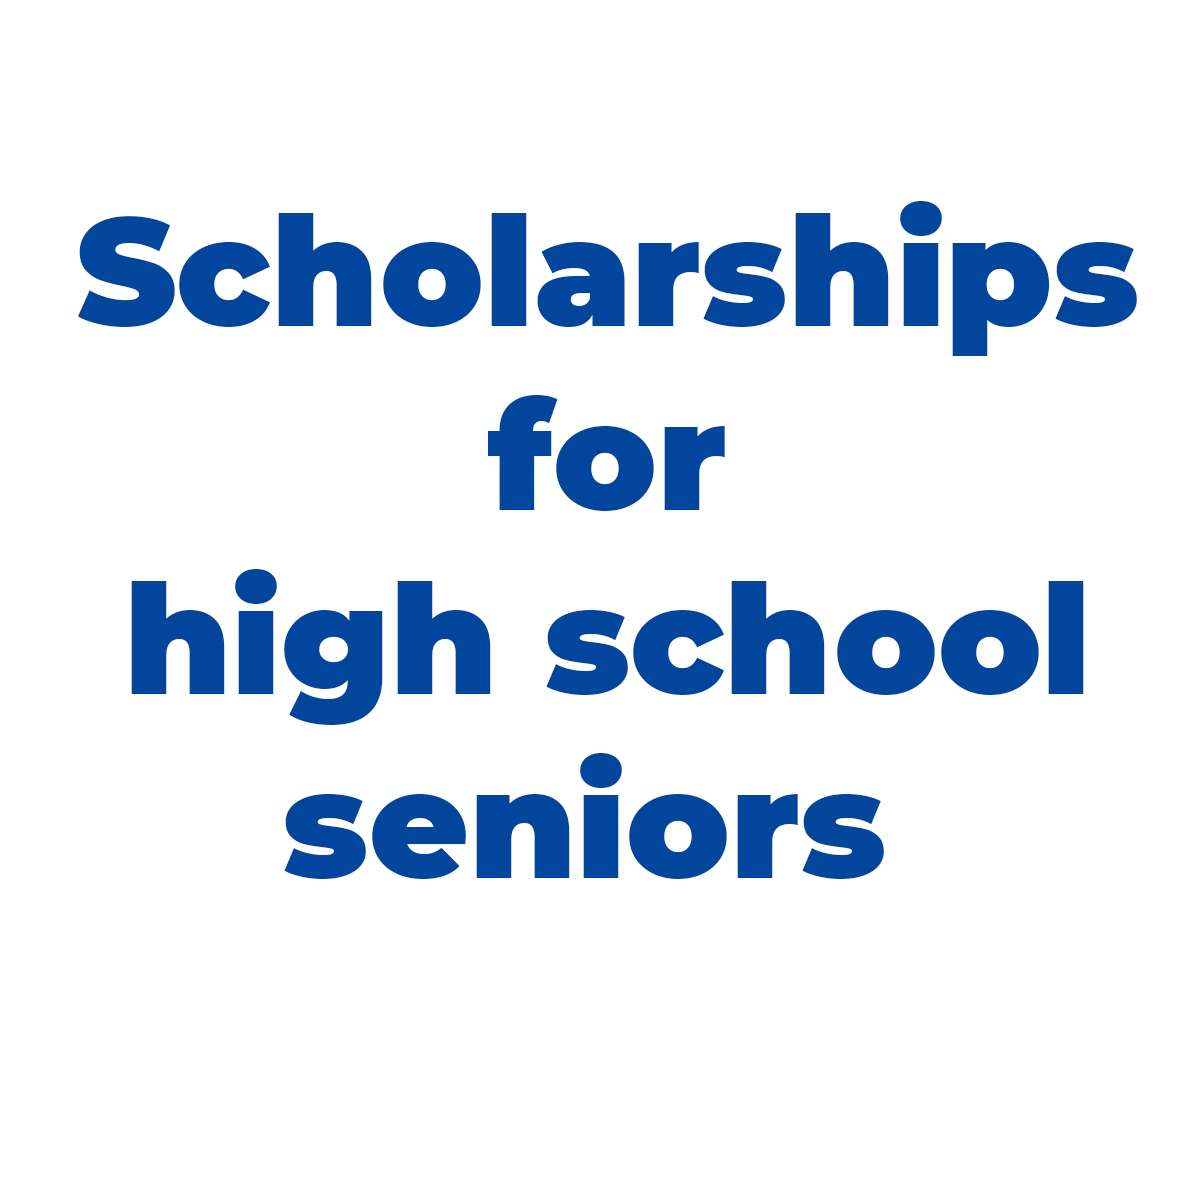 The Ultimate Guide to Scholarships for High School Seniors